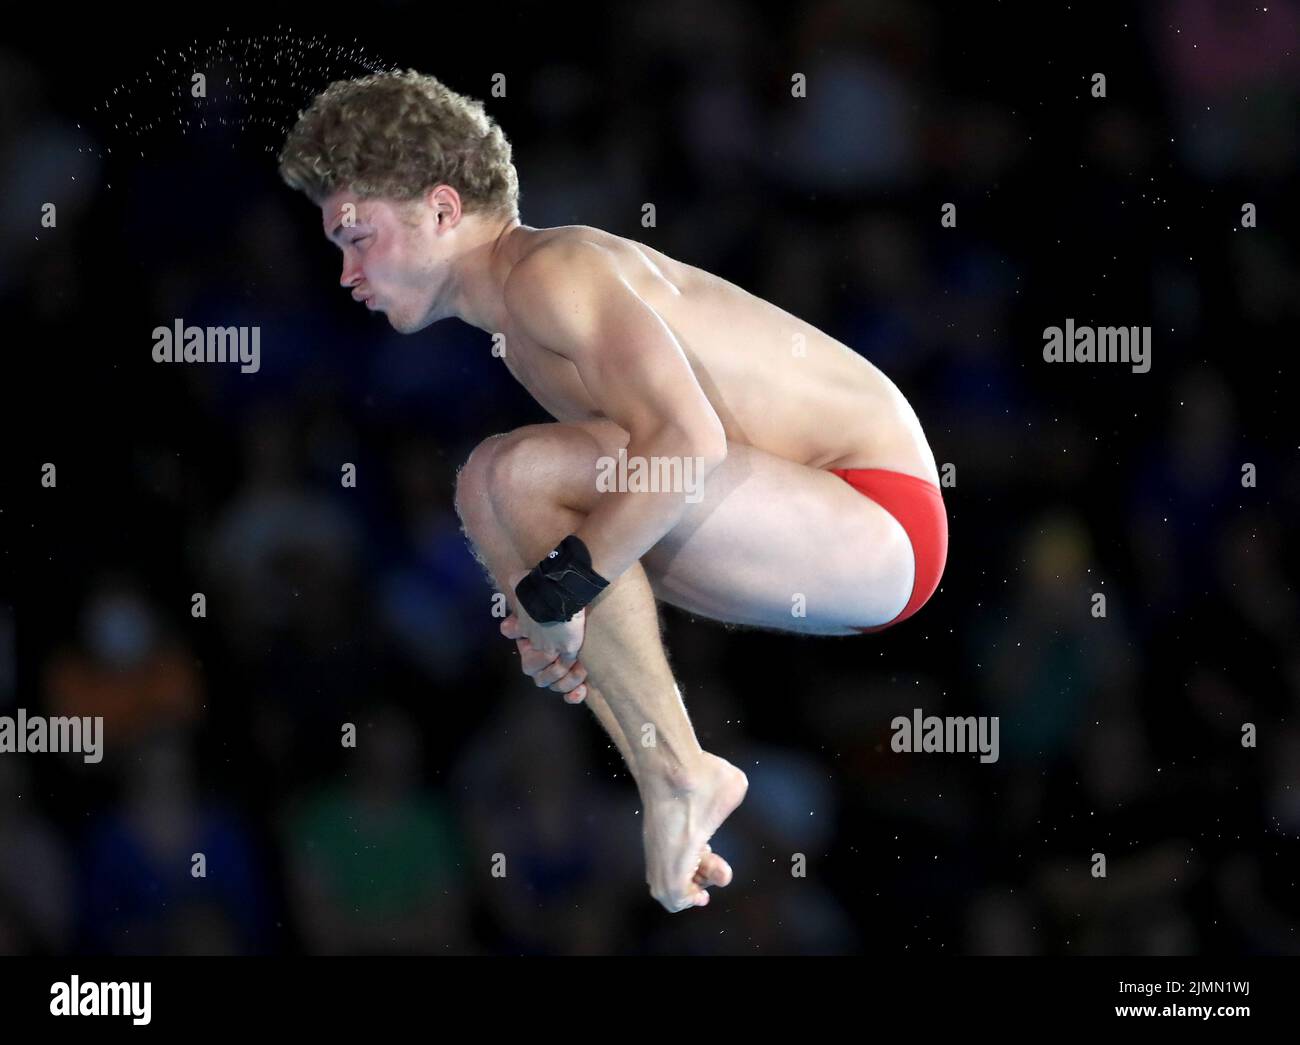 Canada’s Rylan Wiens in action during the Men’s 10m Platform preliminary at Sandwell Aquatics Centre on day ten of the 2022 Commonwealth Games in Birmingham. Picture date: Sunday August 7, 2022. Stock Photo